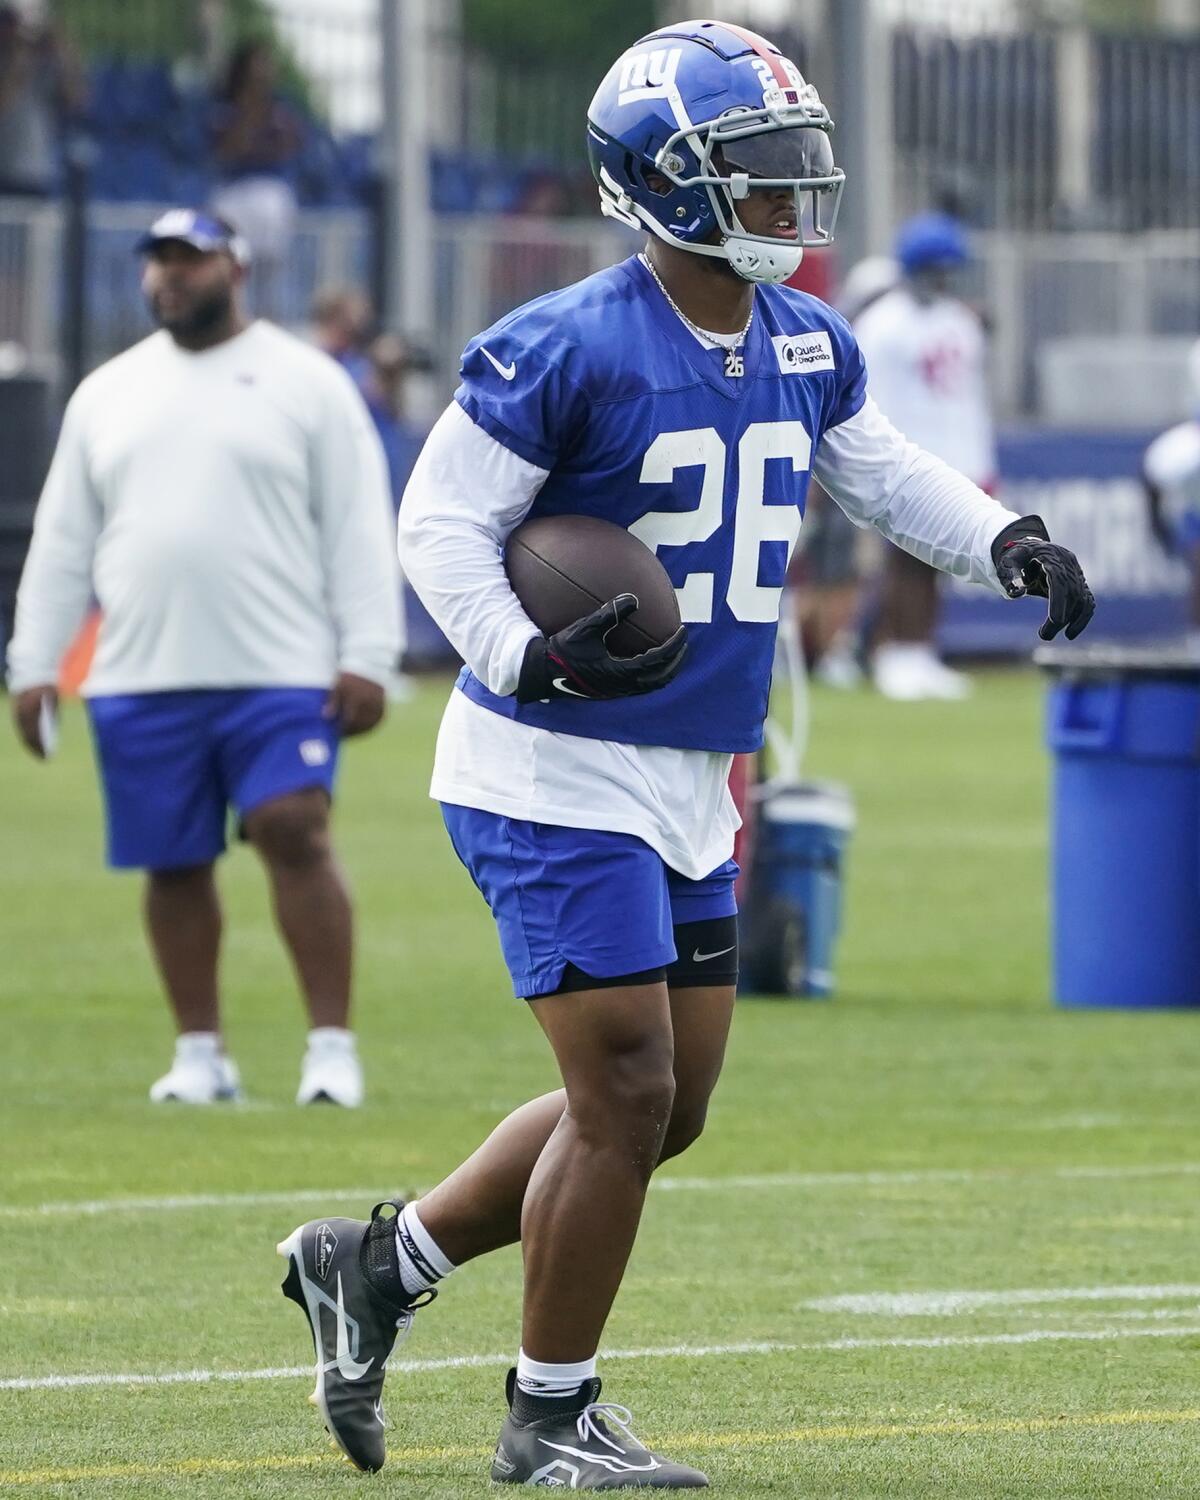 Giants Saquon Barkley Has Fifth Best-Selling Jersey In NFL